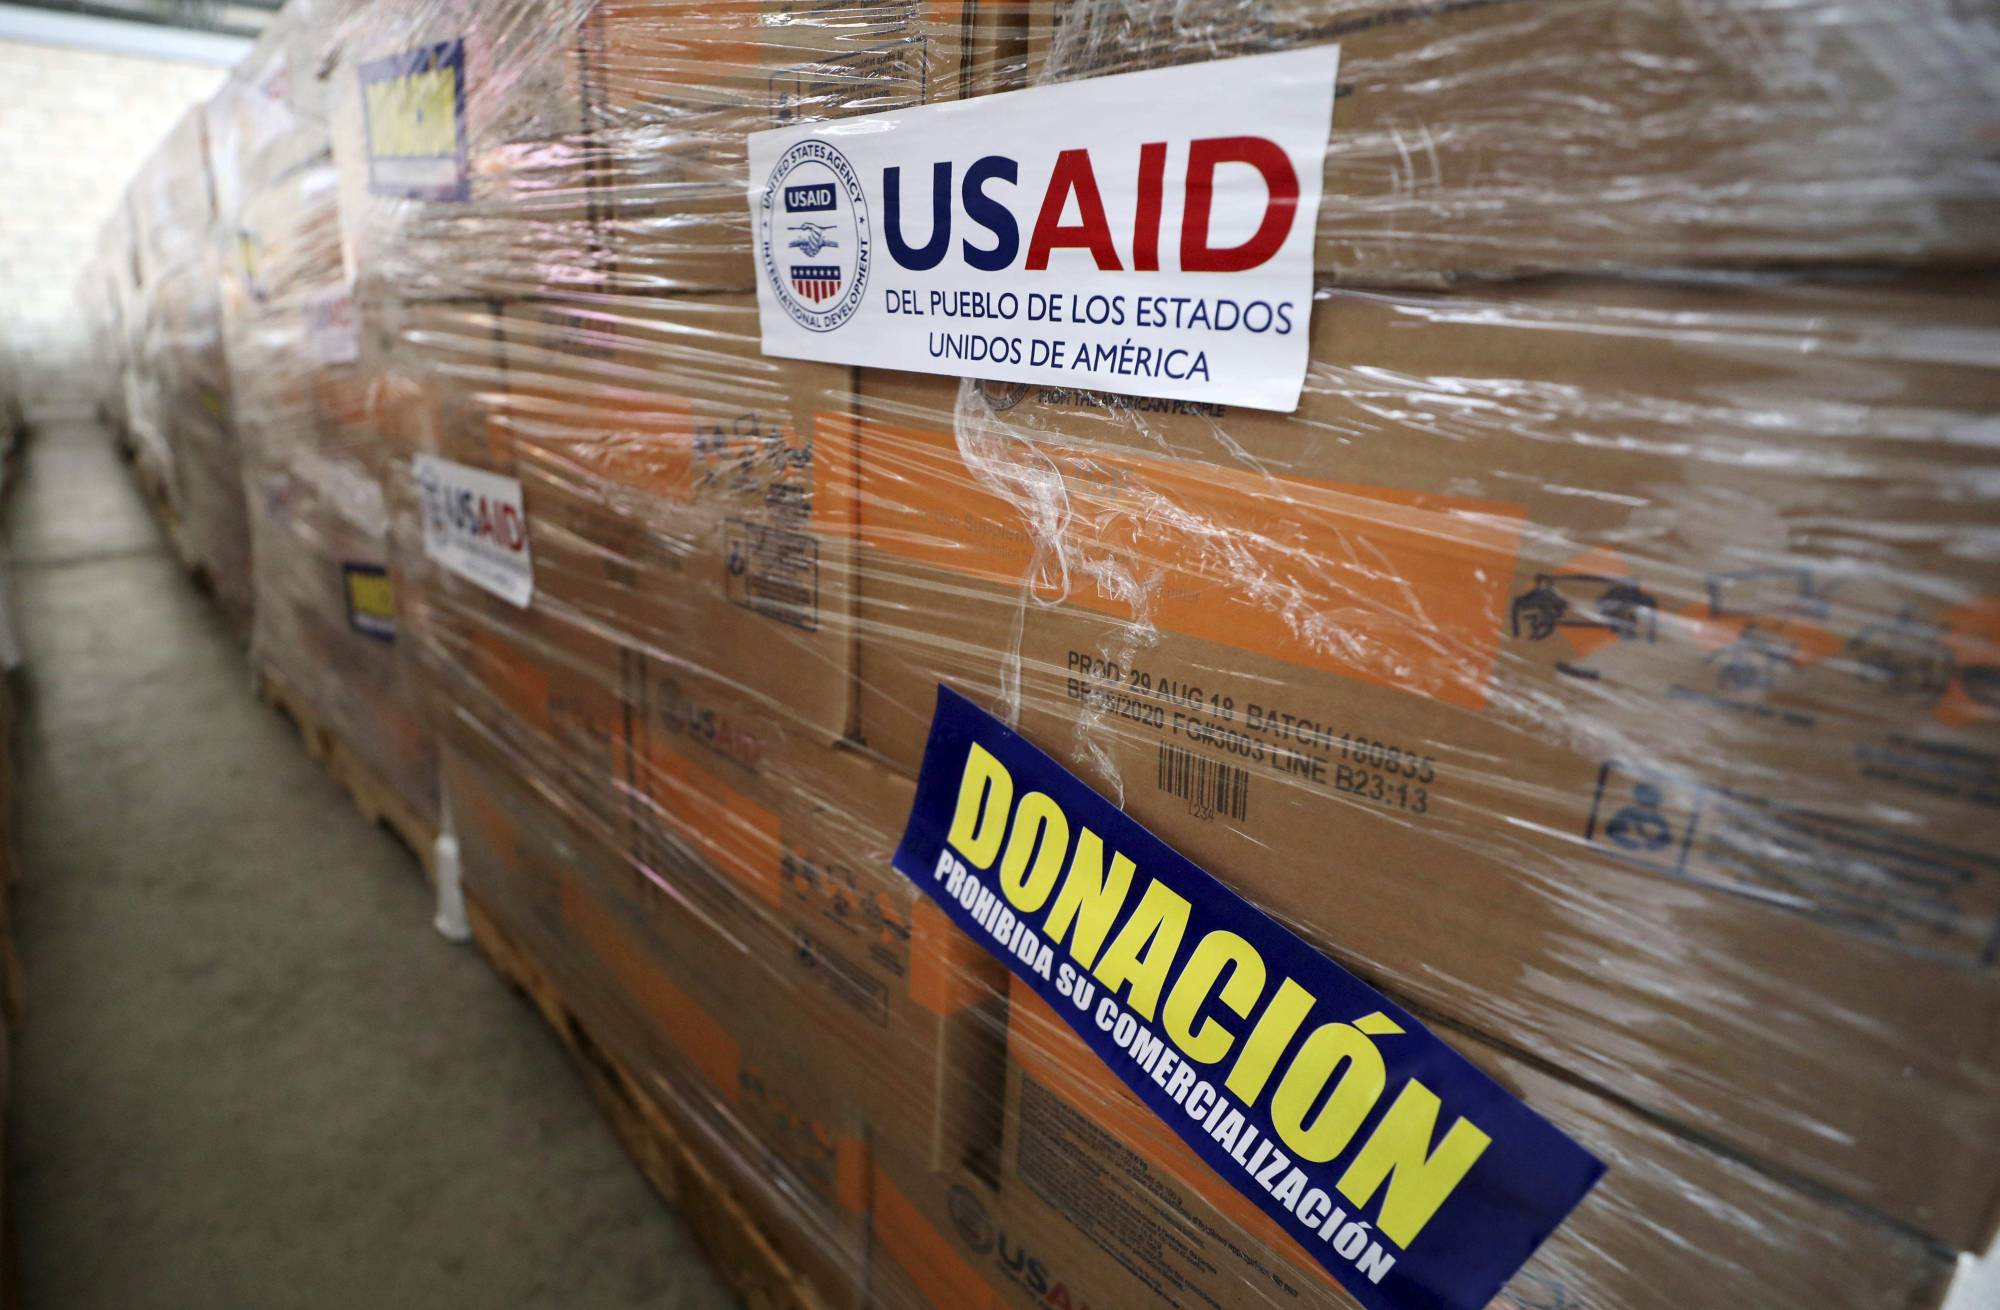 USAID humanitarian aid is stored at a warehouse next to the Tienditas International Bridge on the outskirts of Cucuta, Colombia, on the border with Venezuela, Tuesday, Feb. 19, 2019. The U.S. military airlifted tons of humanitarian aid as part of an effort meant to undermine socialist President Nicolas Maduro and back his rival for the leadership of the South American nation. (AP Photo/Fernando Vergara)